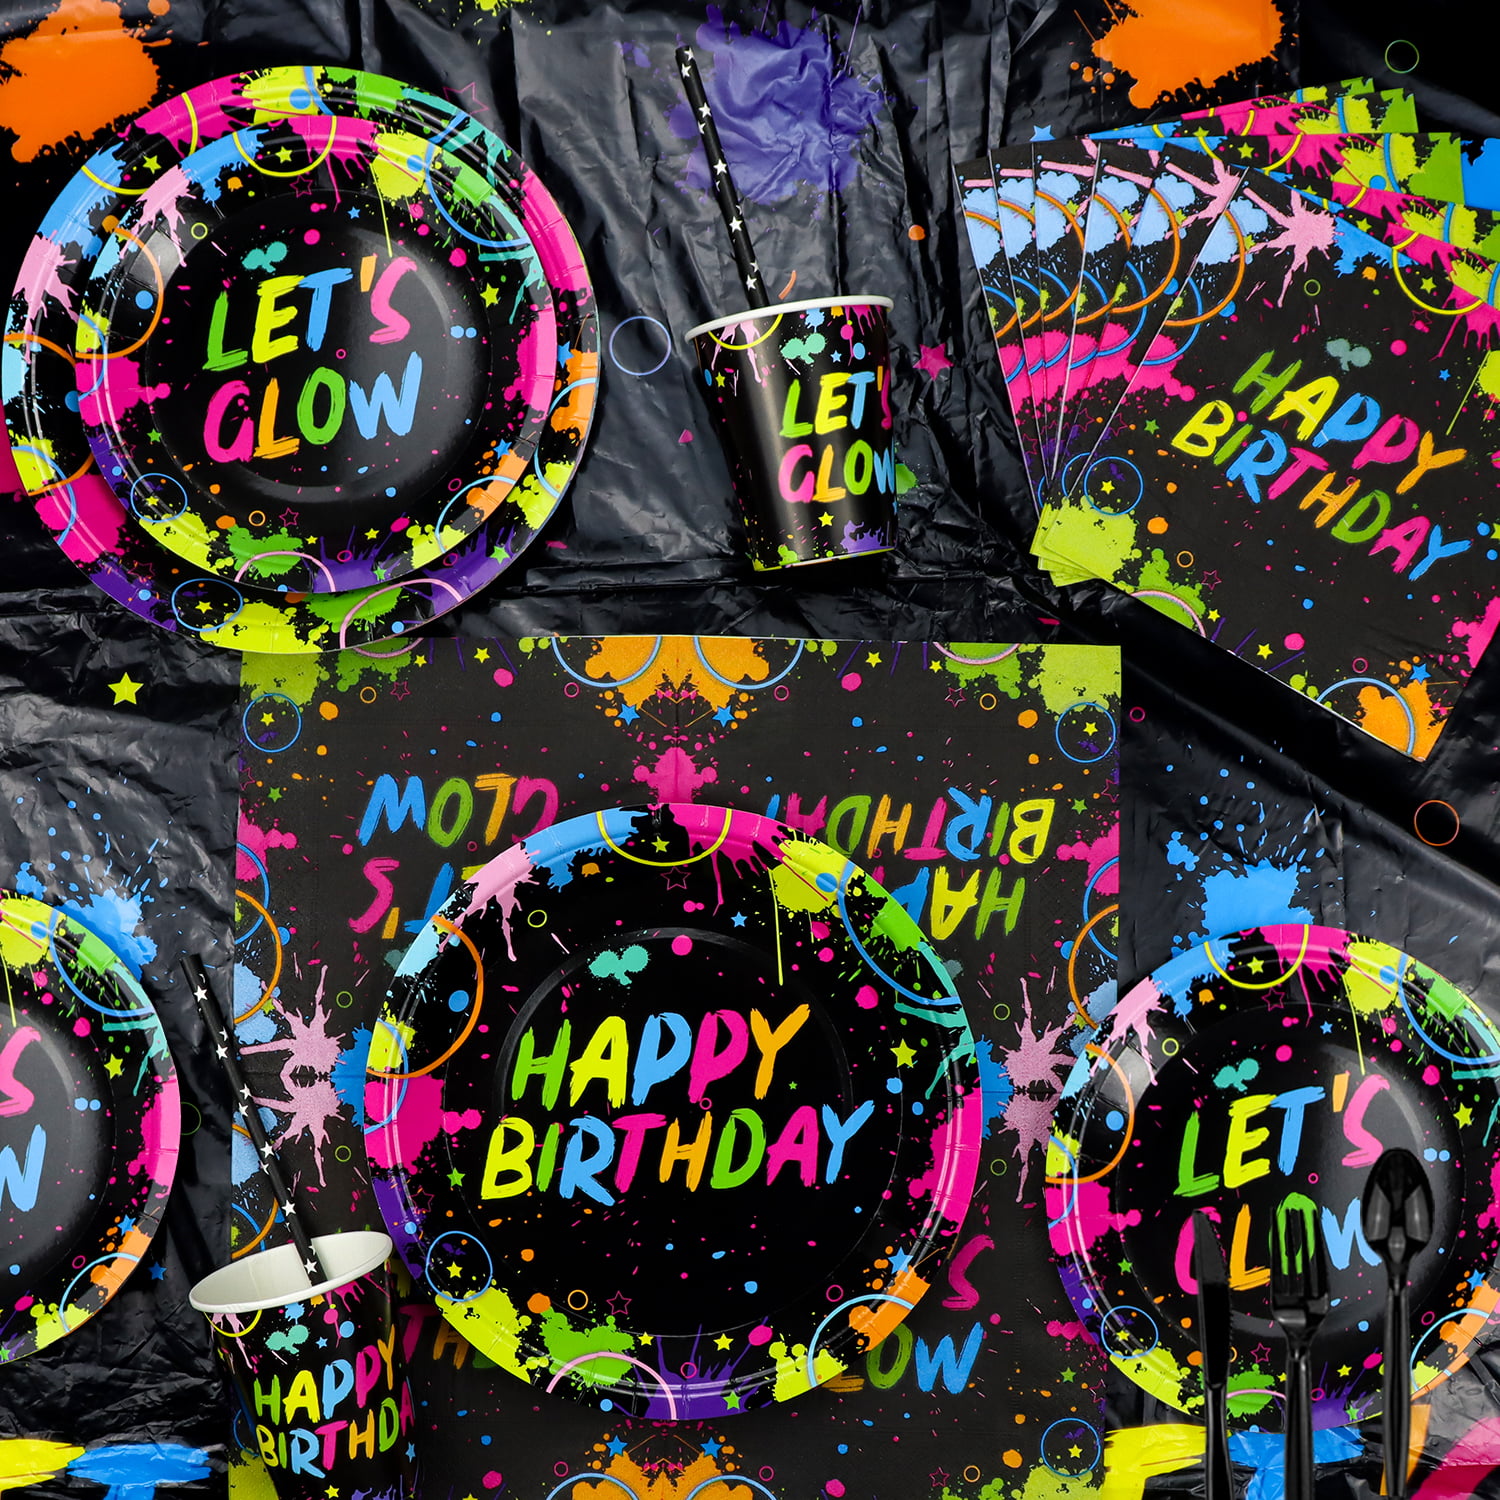  243 Pieces Glow Neon Party Supplies - Neon Balloons, Glow in  the Dark LET'S GLOW Backdrop Banner, Garlands, Tablecloth, Plates, Napkins,  and Cup for Blacklight Party Decorations, Serve 20 Guests 